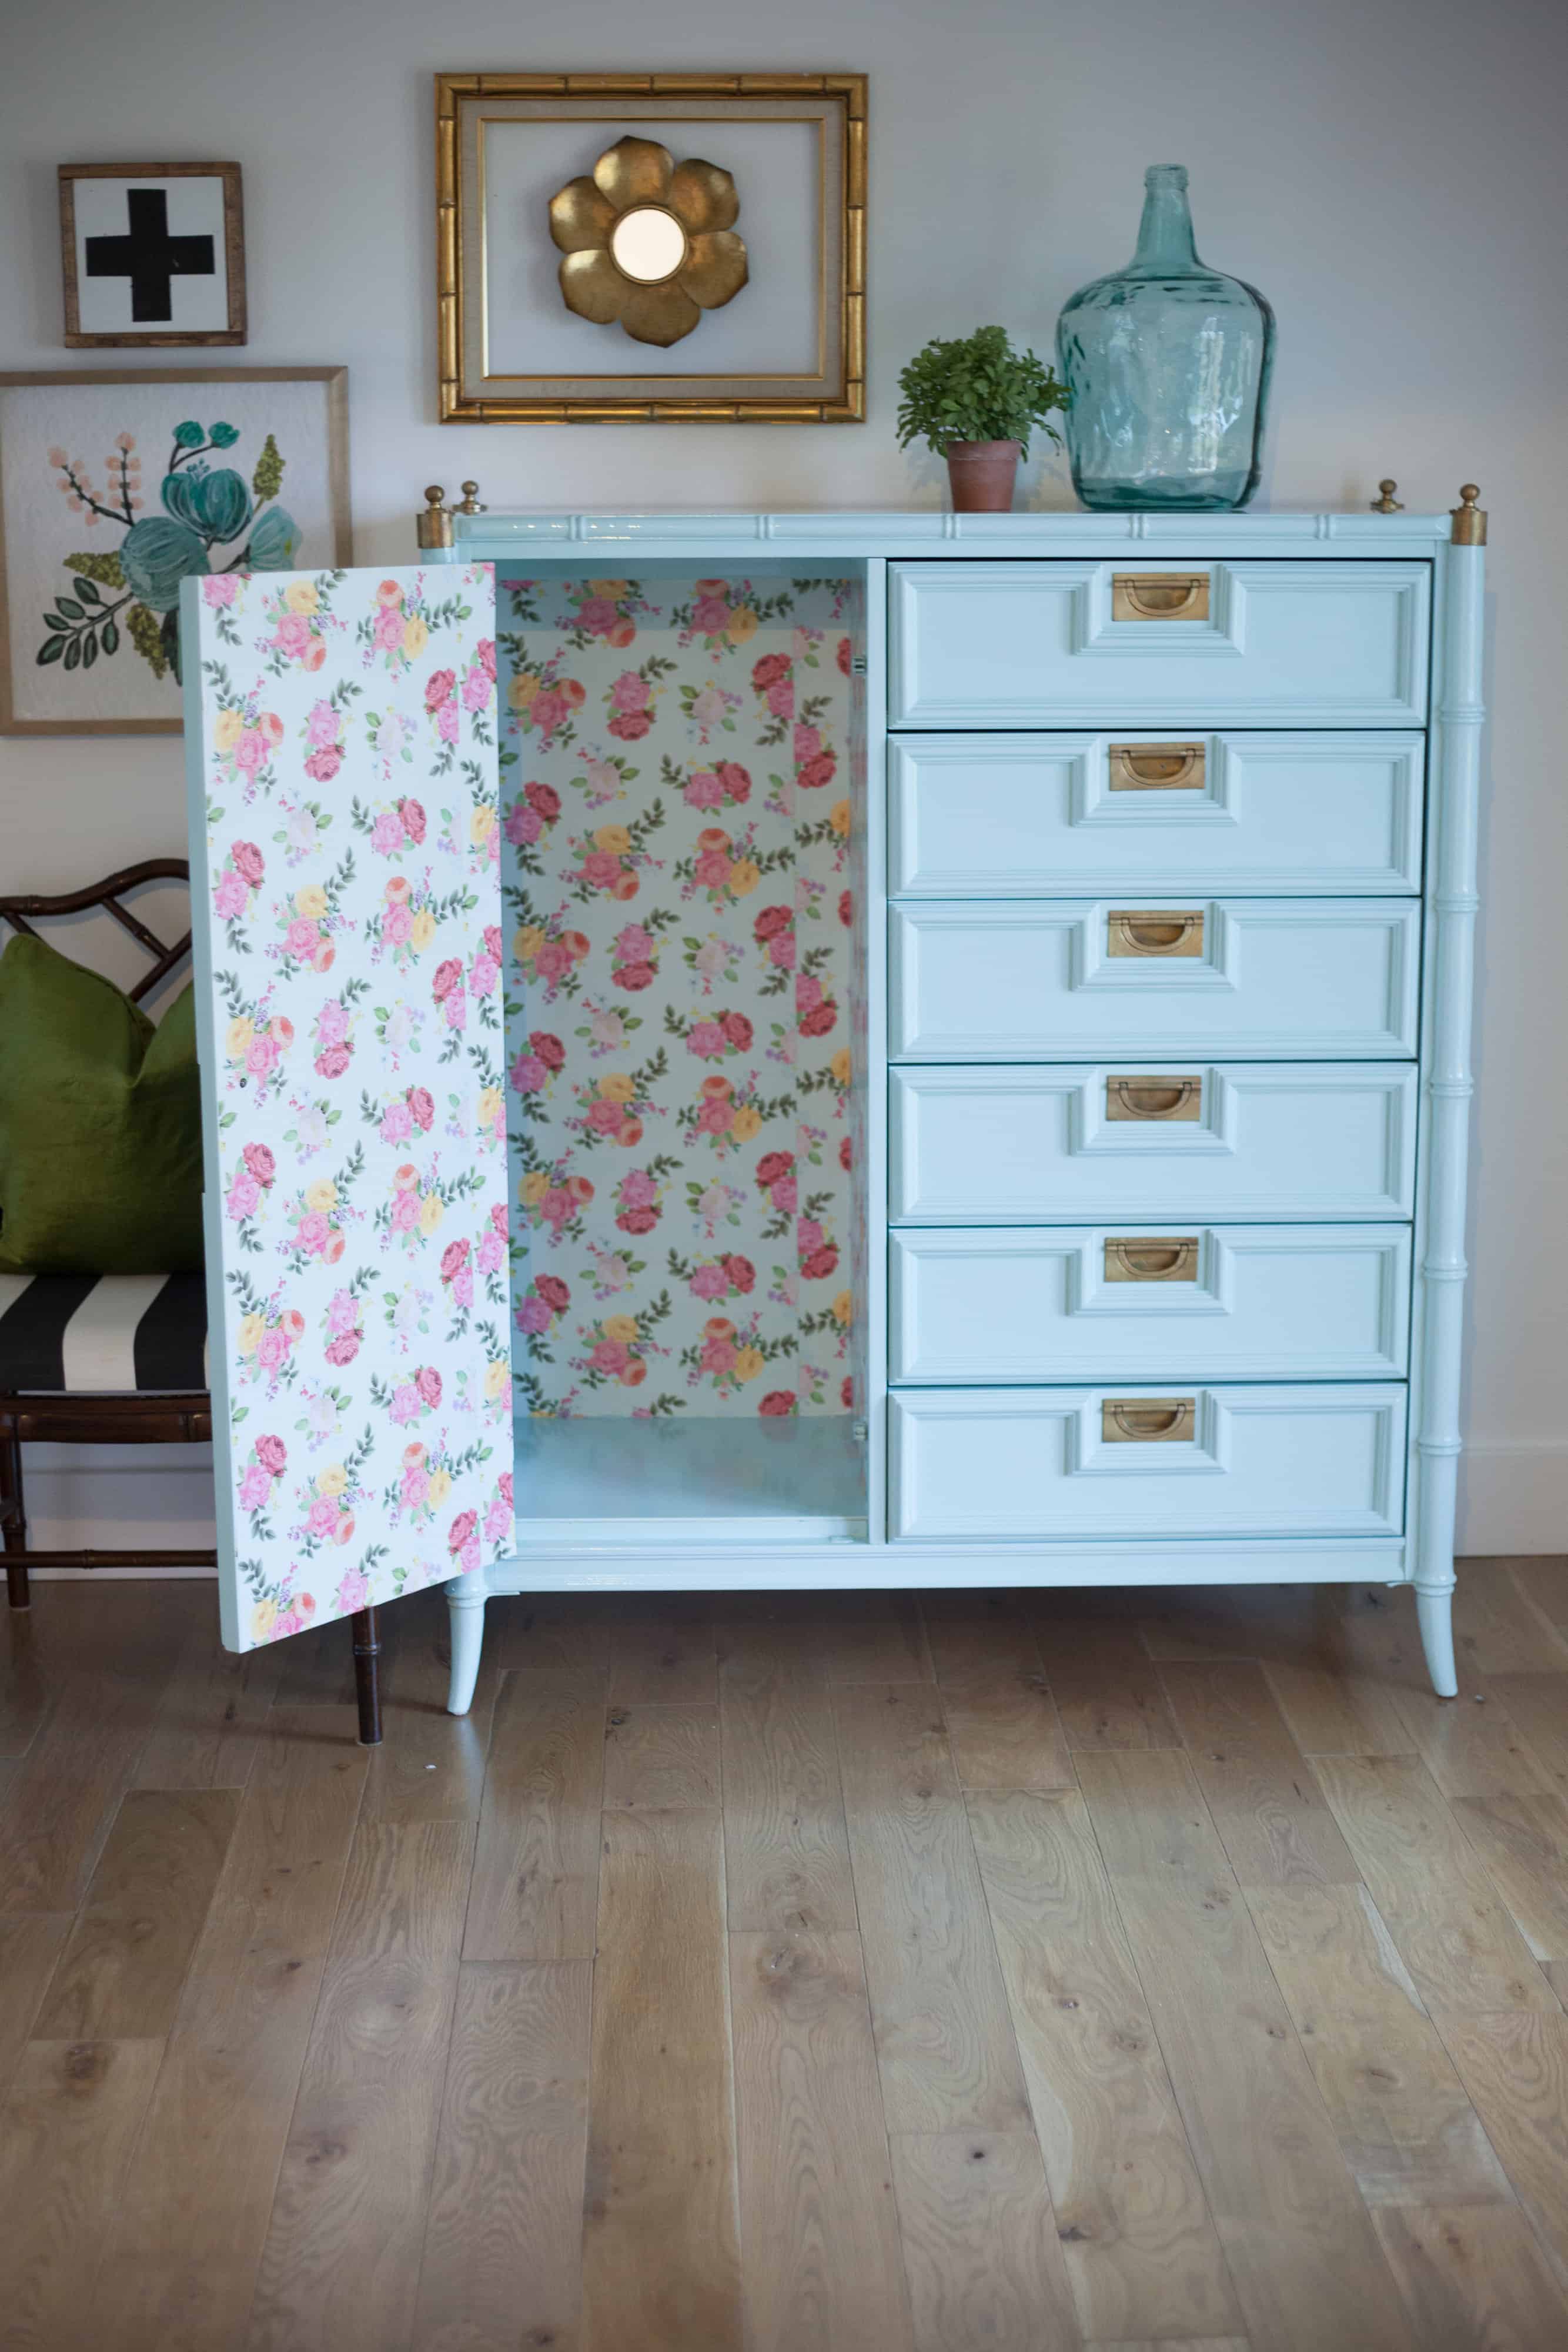 Attaching craft paper to furniture using mod podge. How to take your boring furniture and turn it into a beautiful, one of a kind piece!